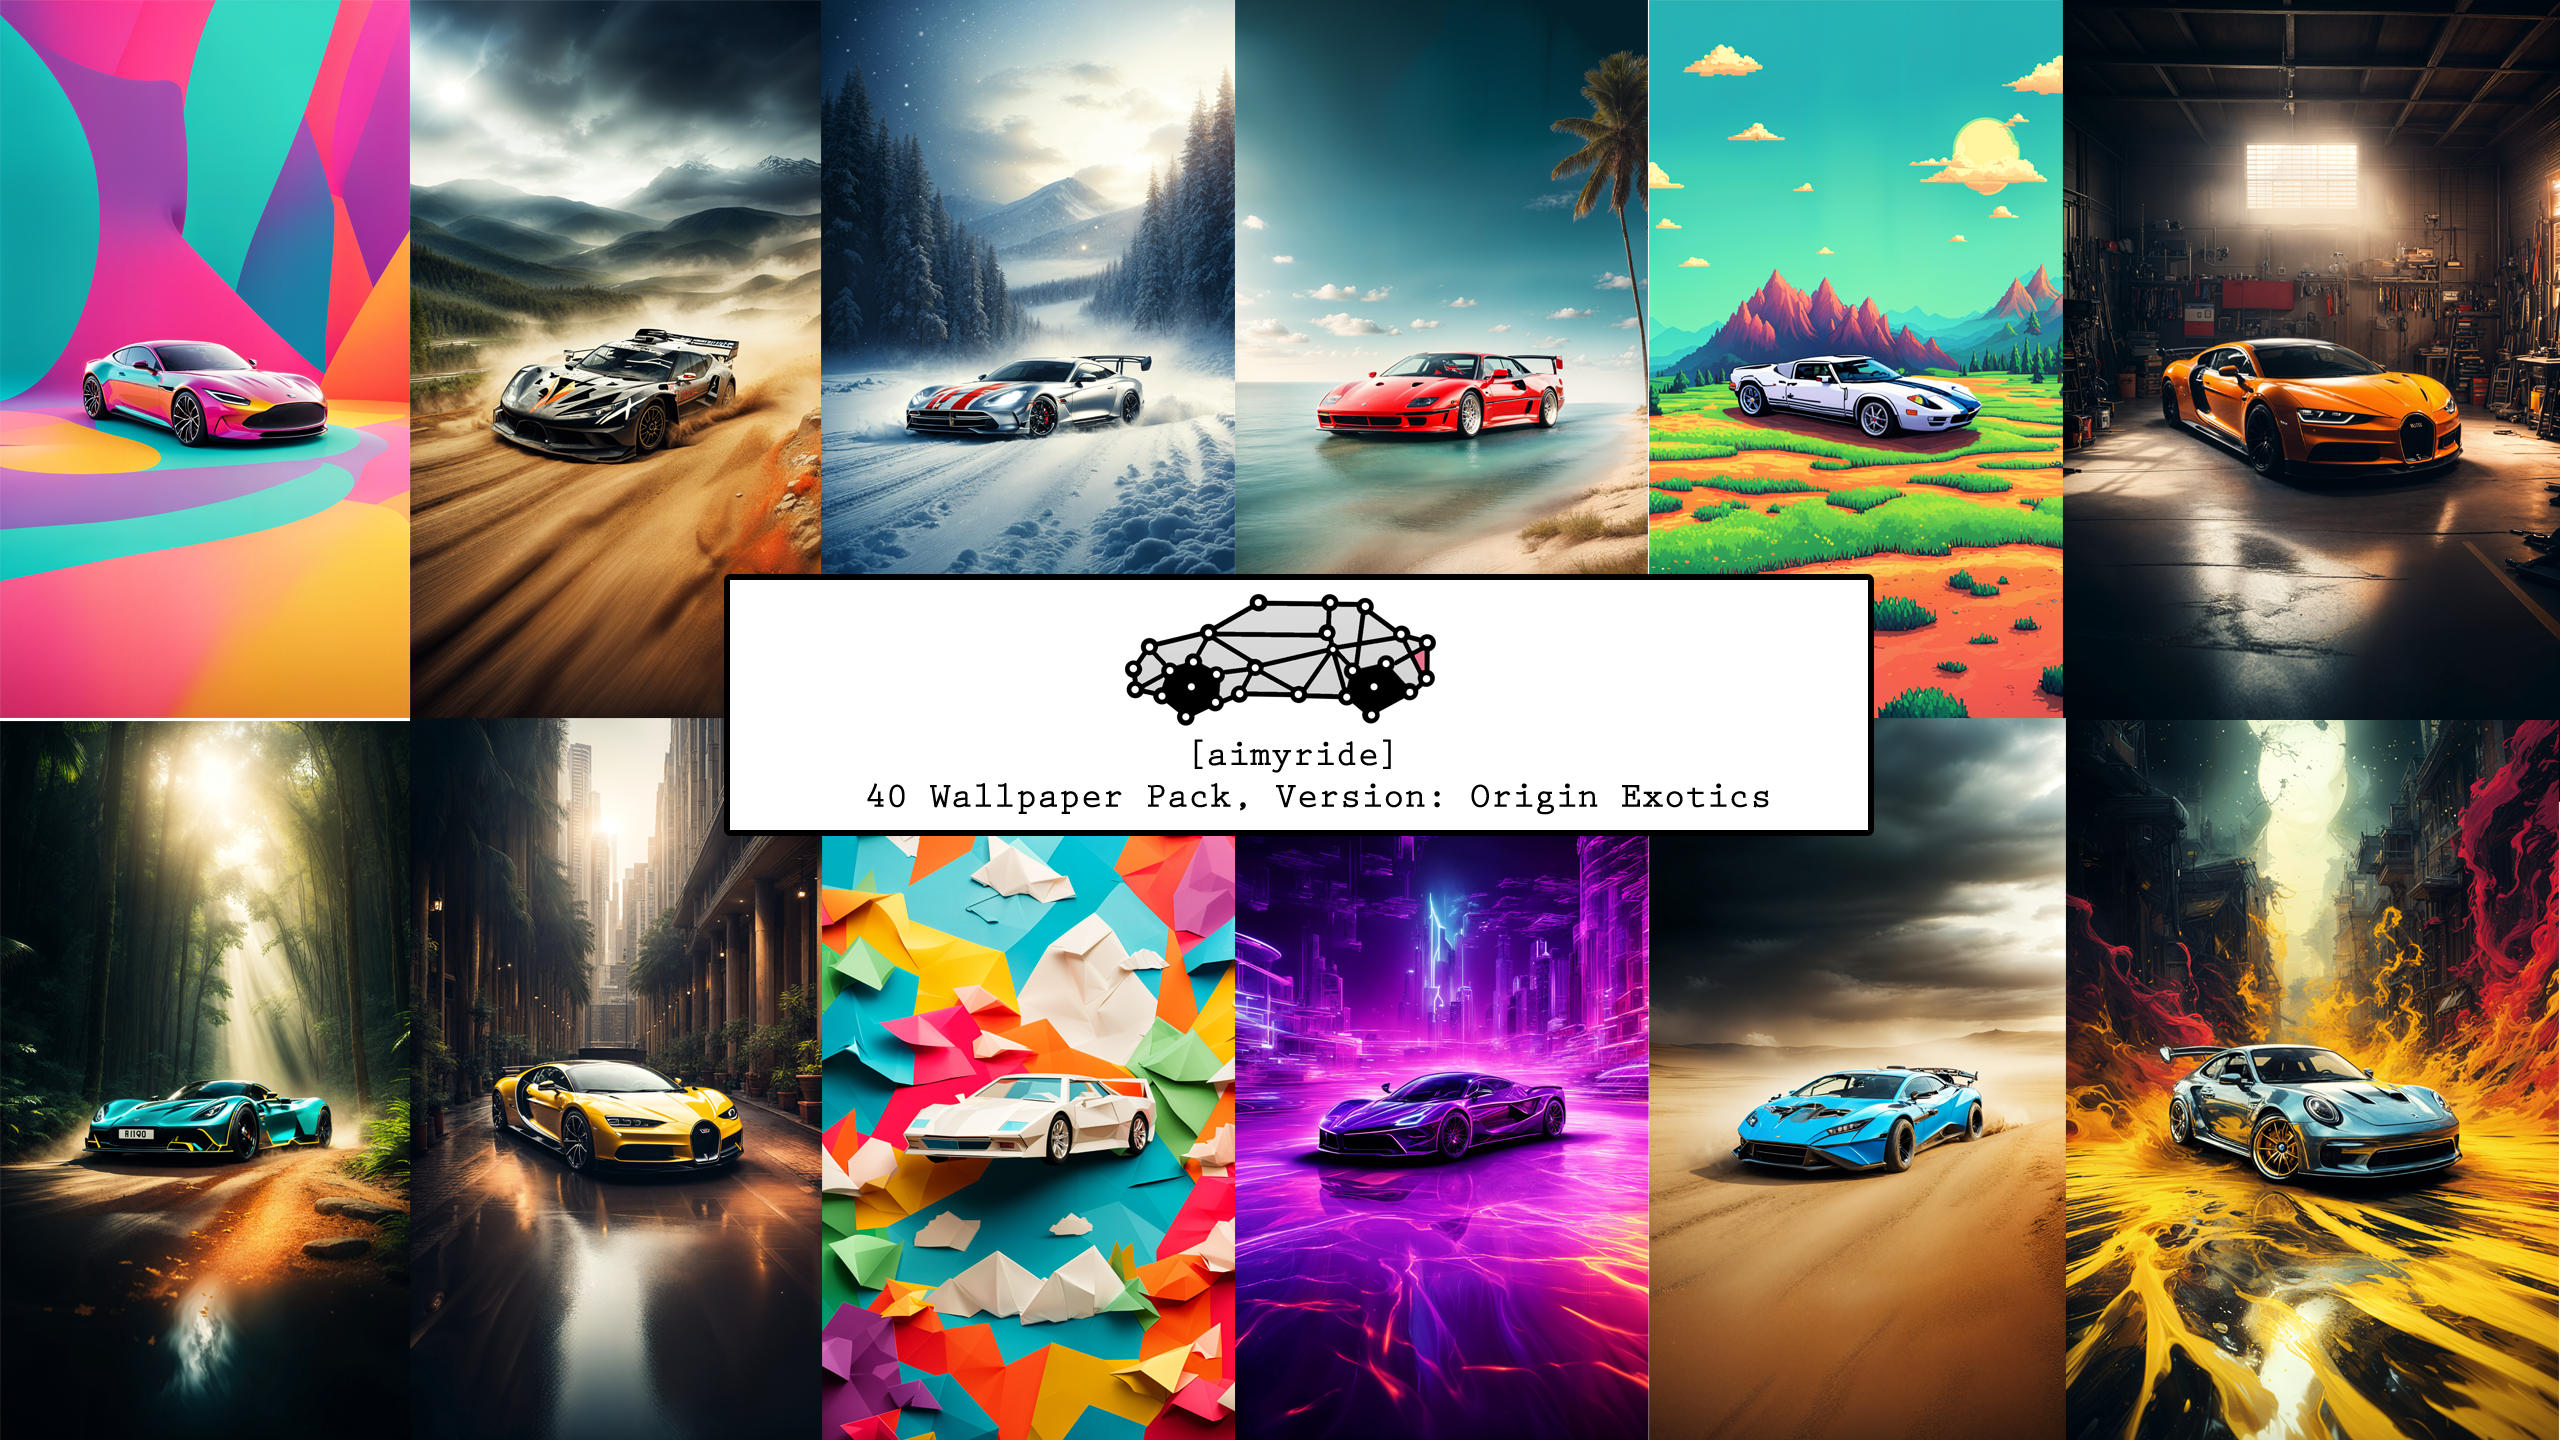 Collection of aimyride wallpapers, exotics using the original styles